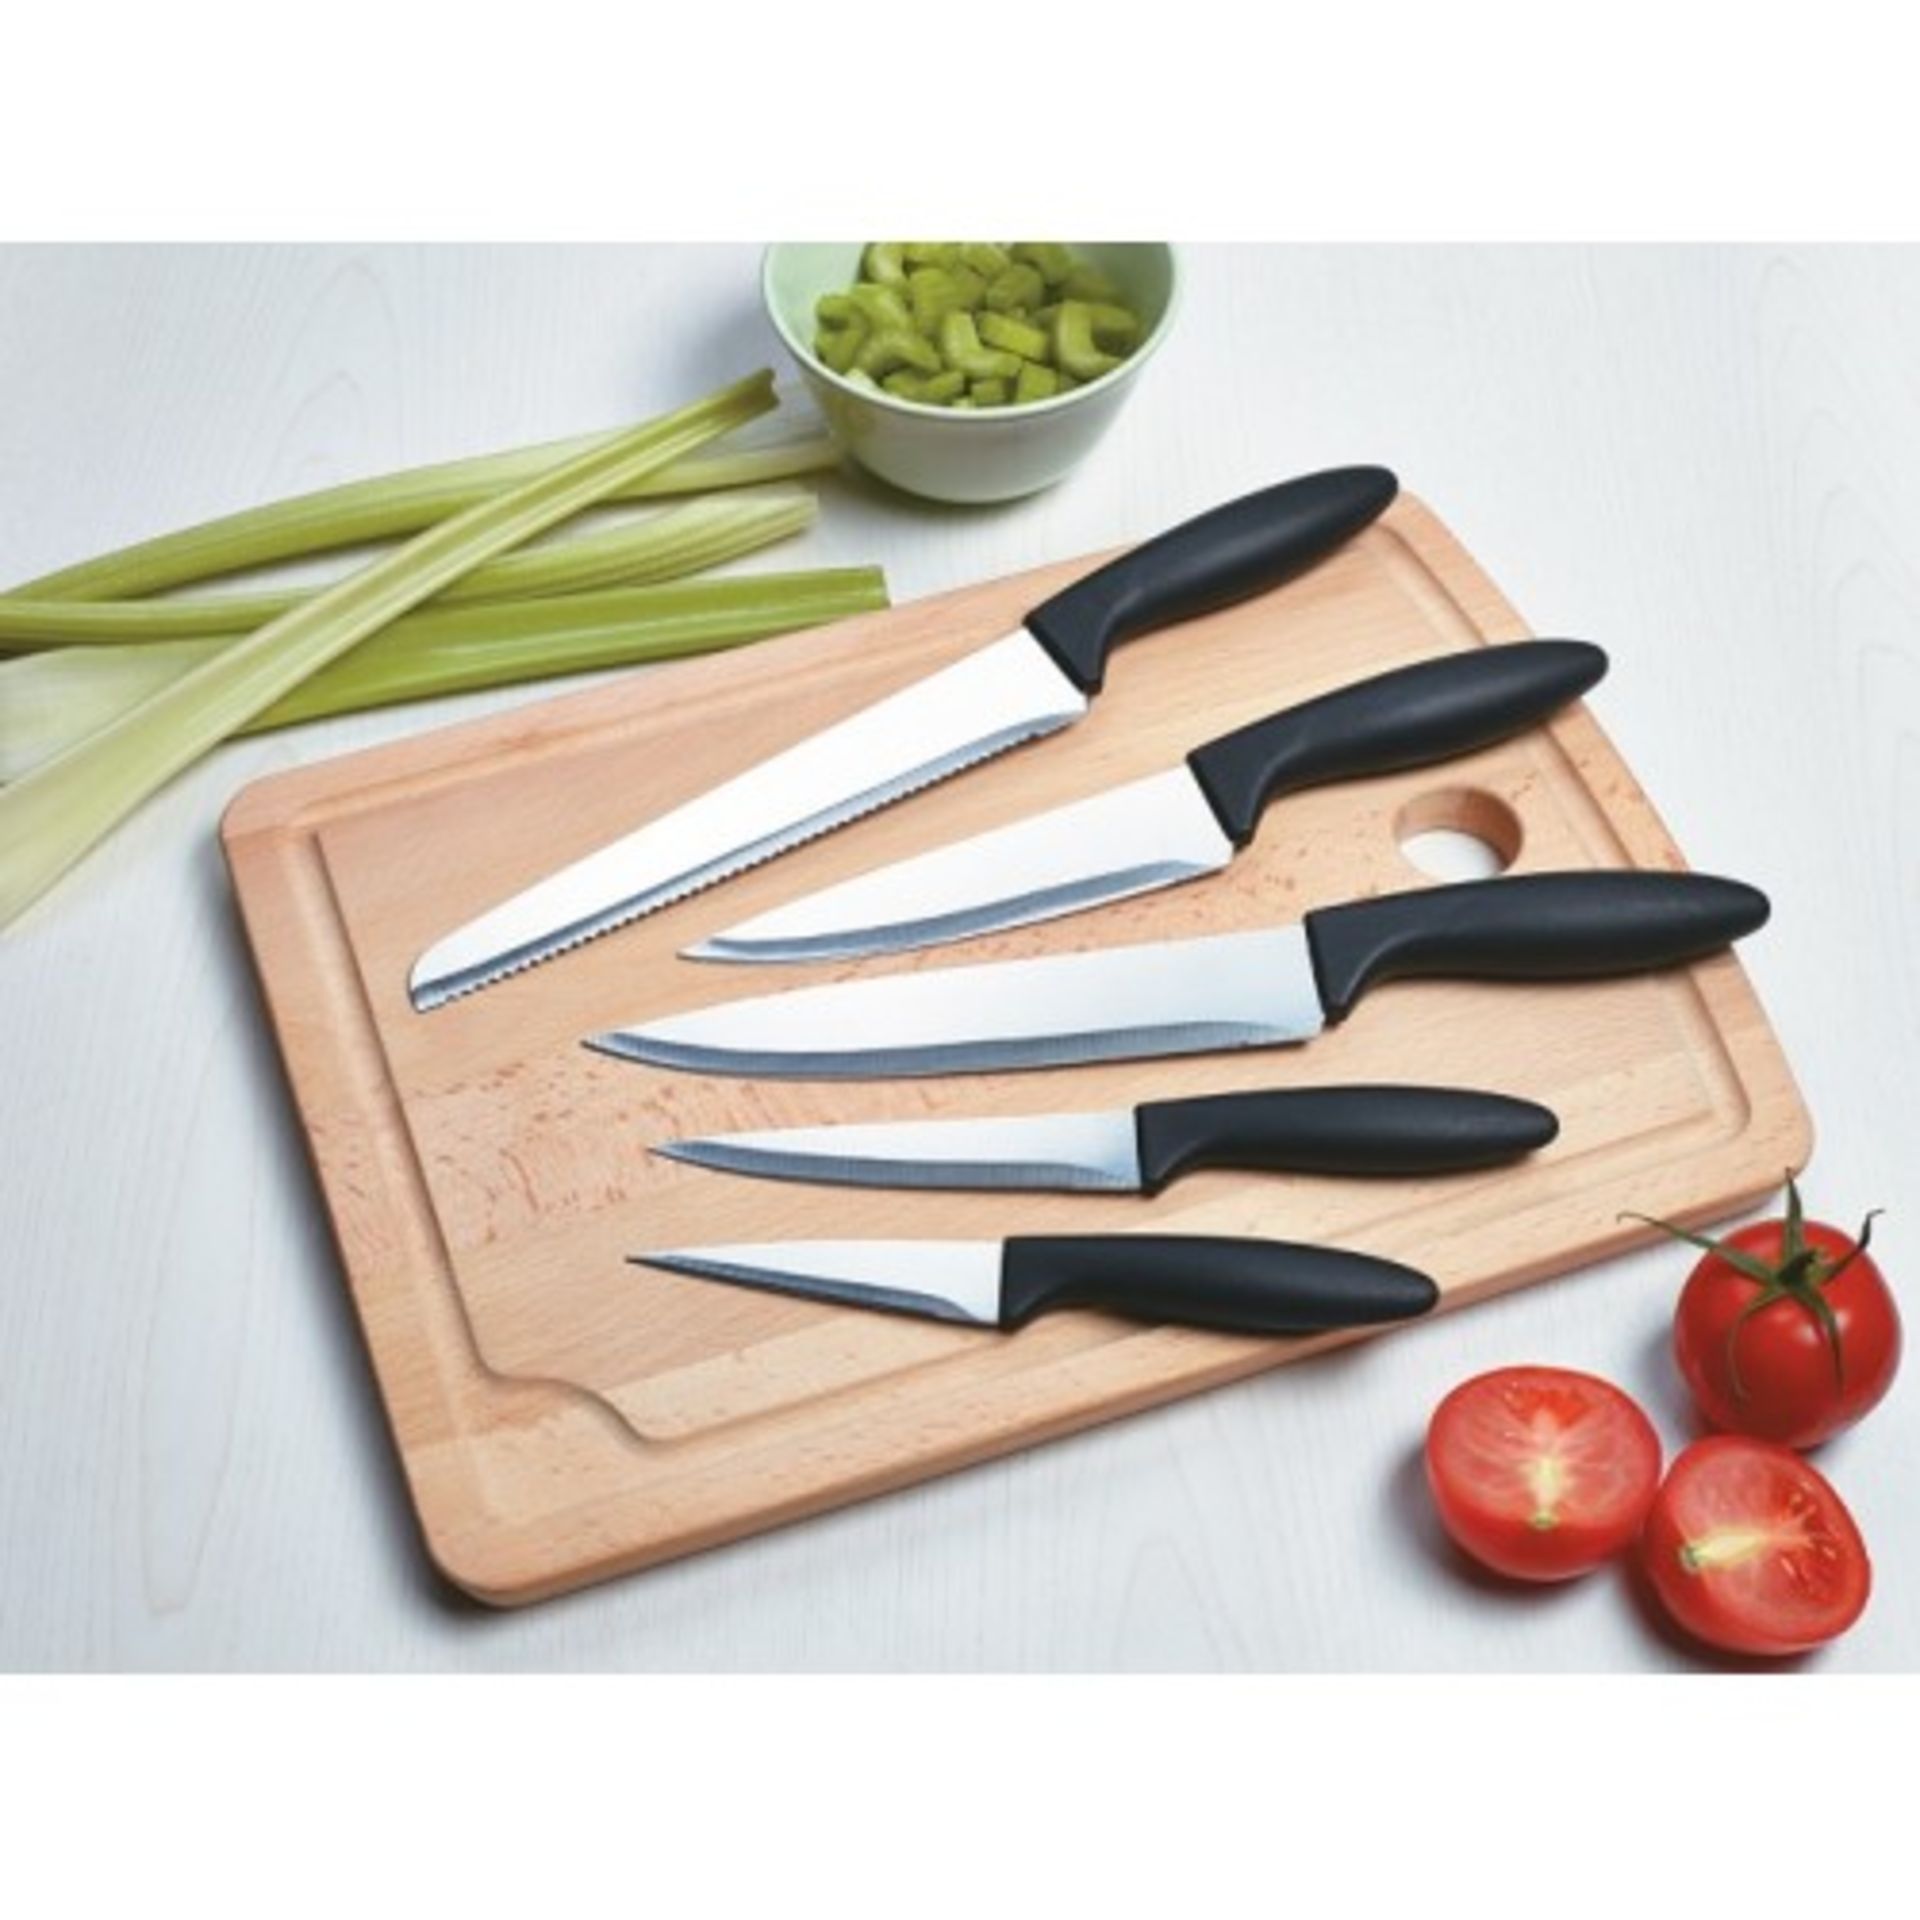 V Brand New A Set Of Five Stainless Steel Knives With Black Handles-Two Chef Knives-Paring Knife-